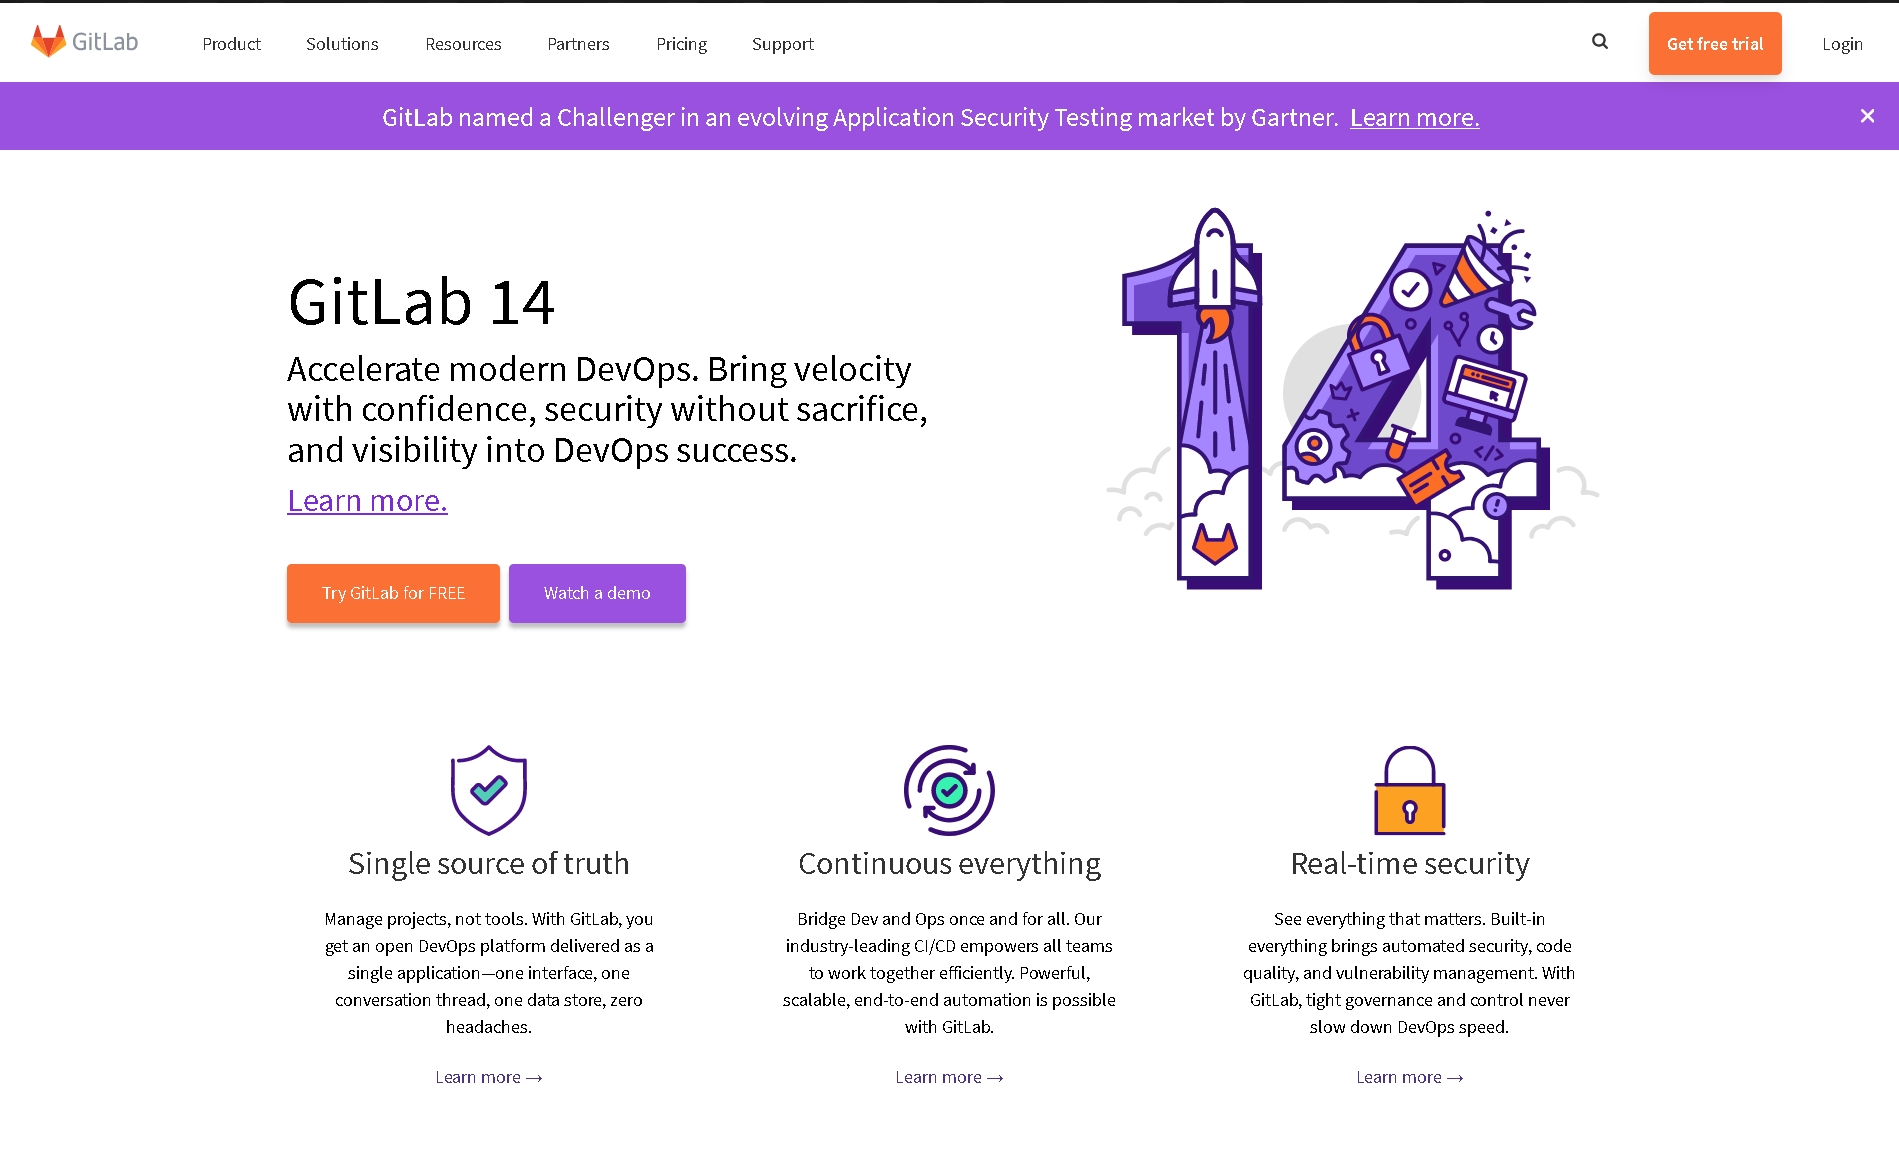 GitLab is an alternative to GitHub. Image shows the GitLab landing page.